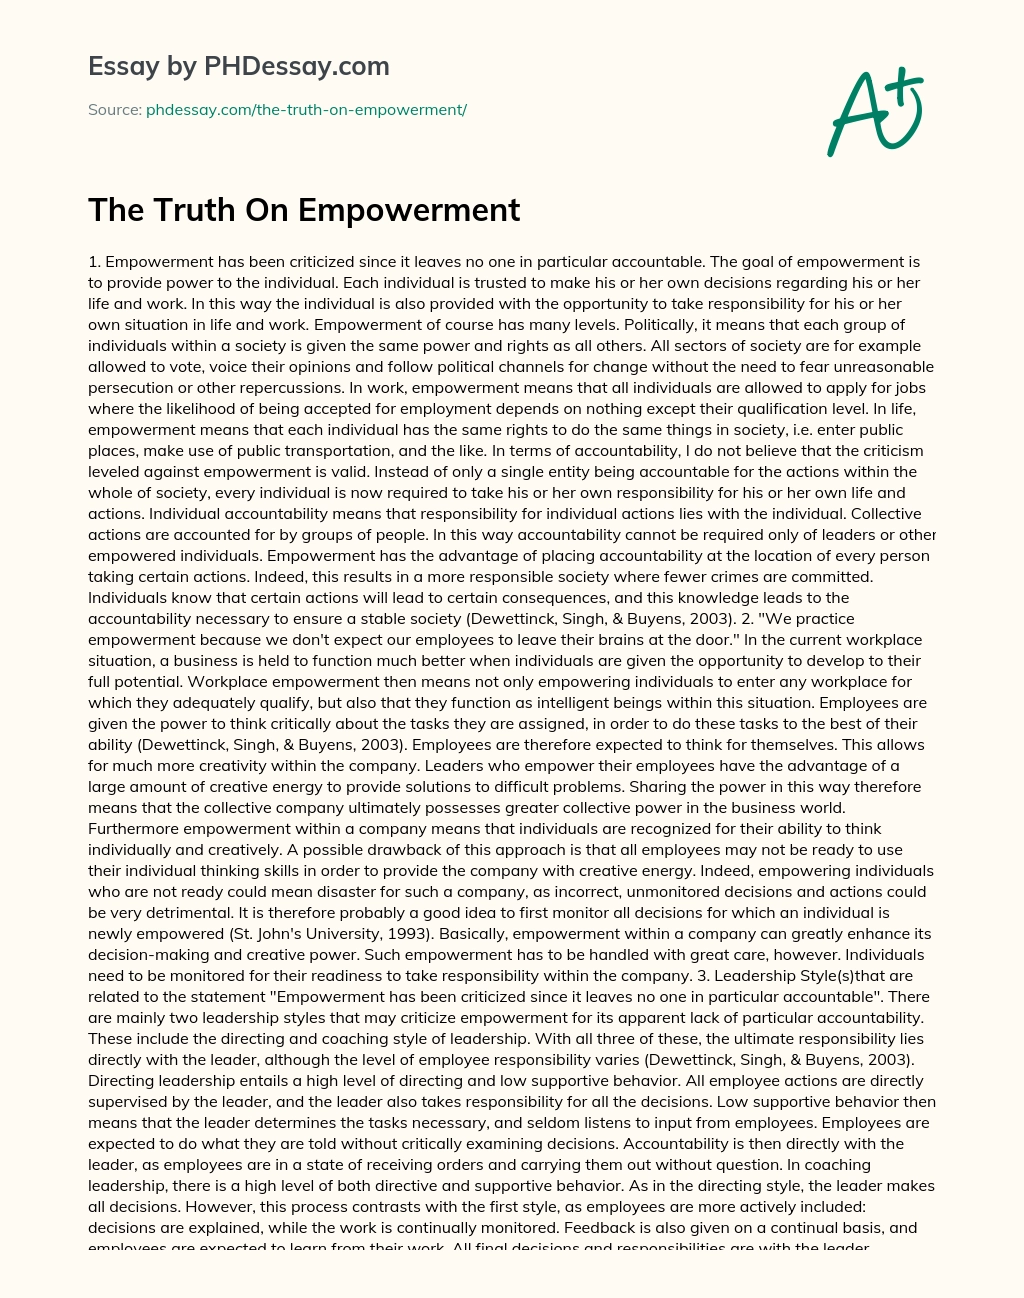 The Truth On Empowerment essay